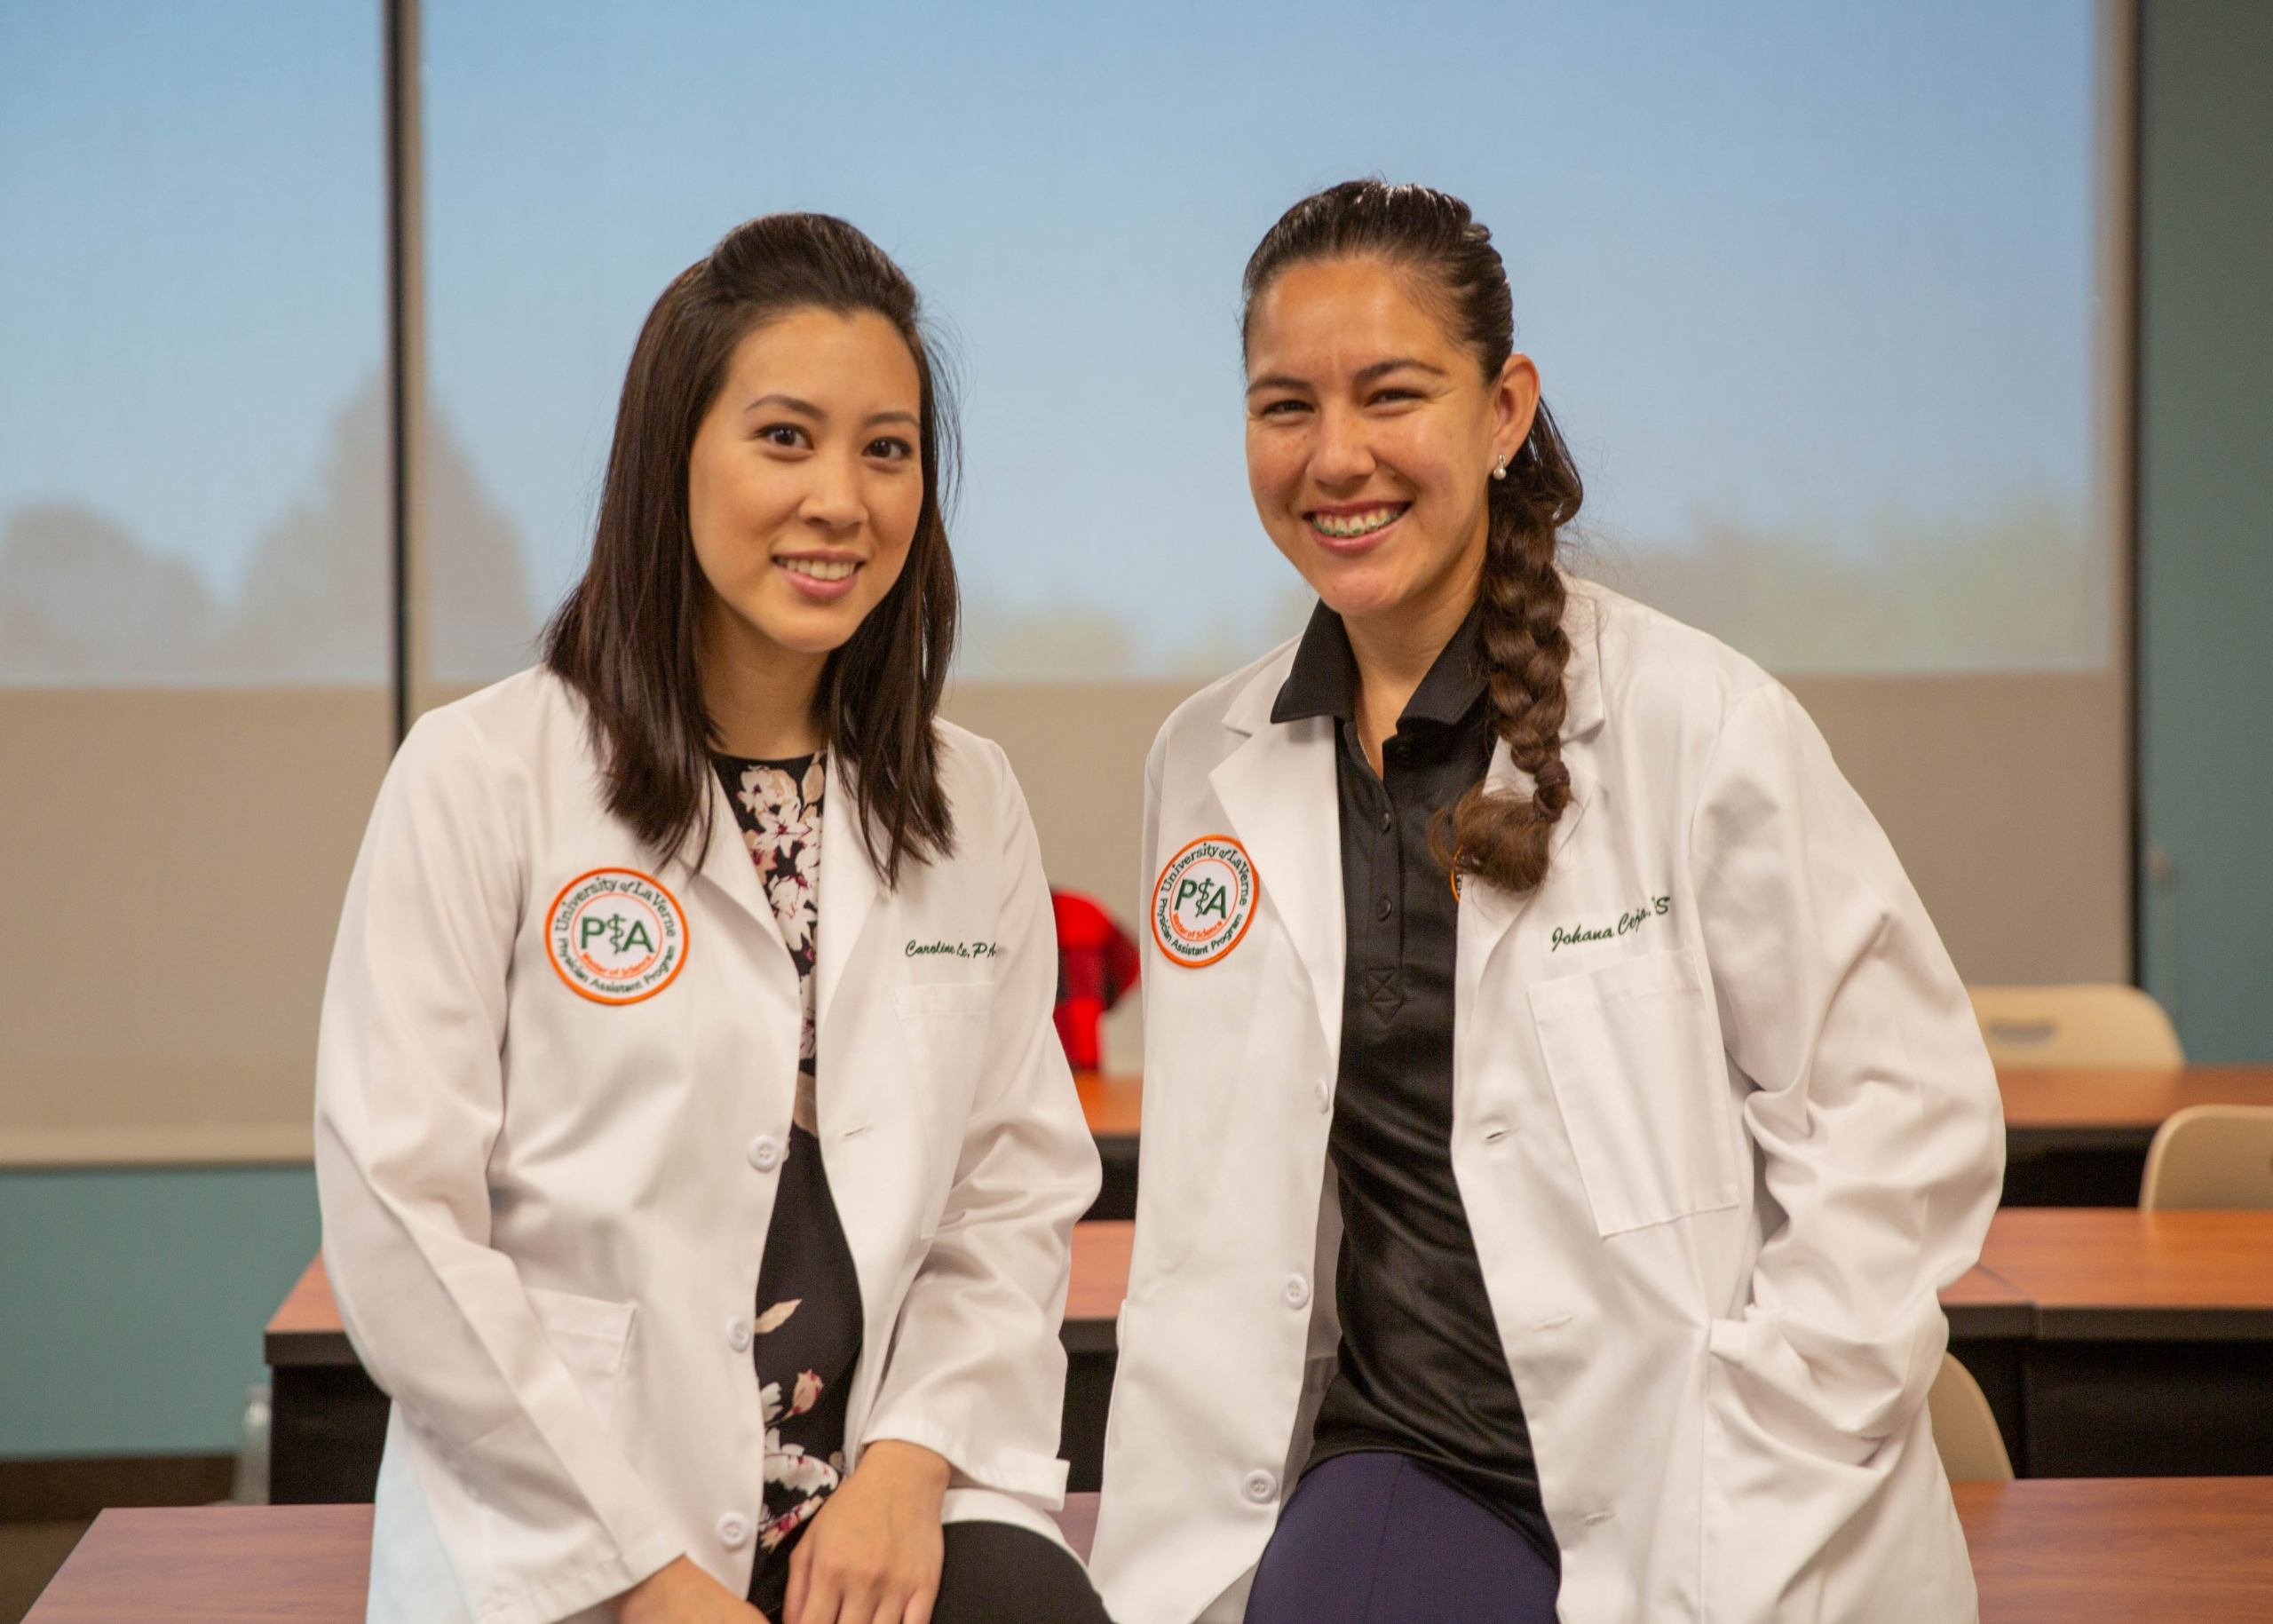 Physician Assistant Students Rise to the Challenge | University of La Verne